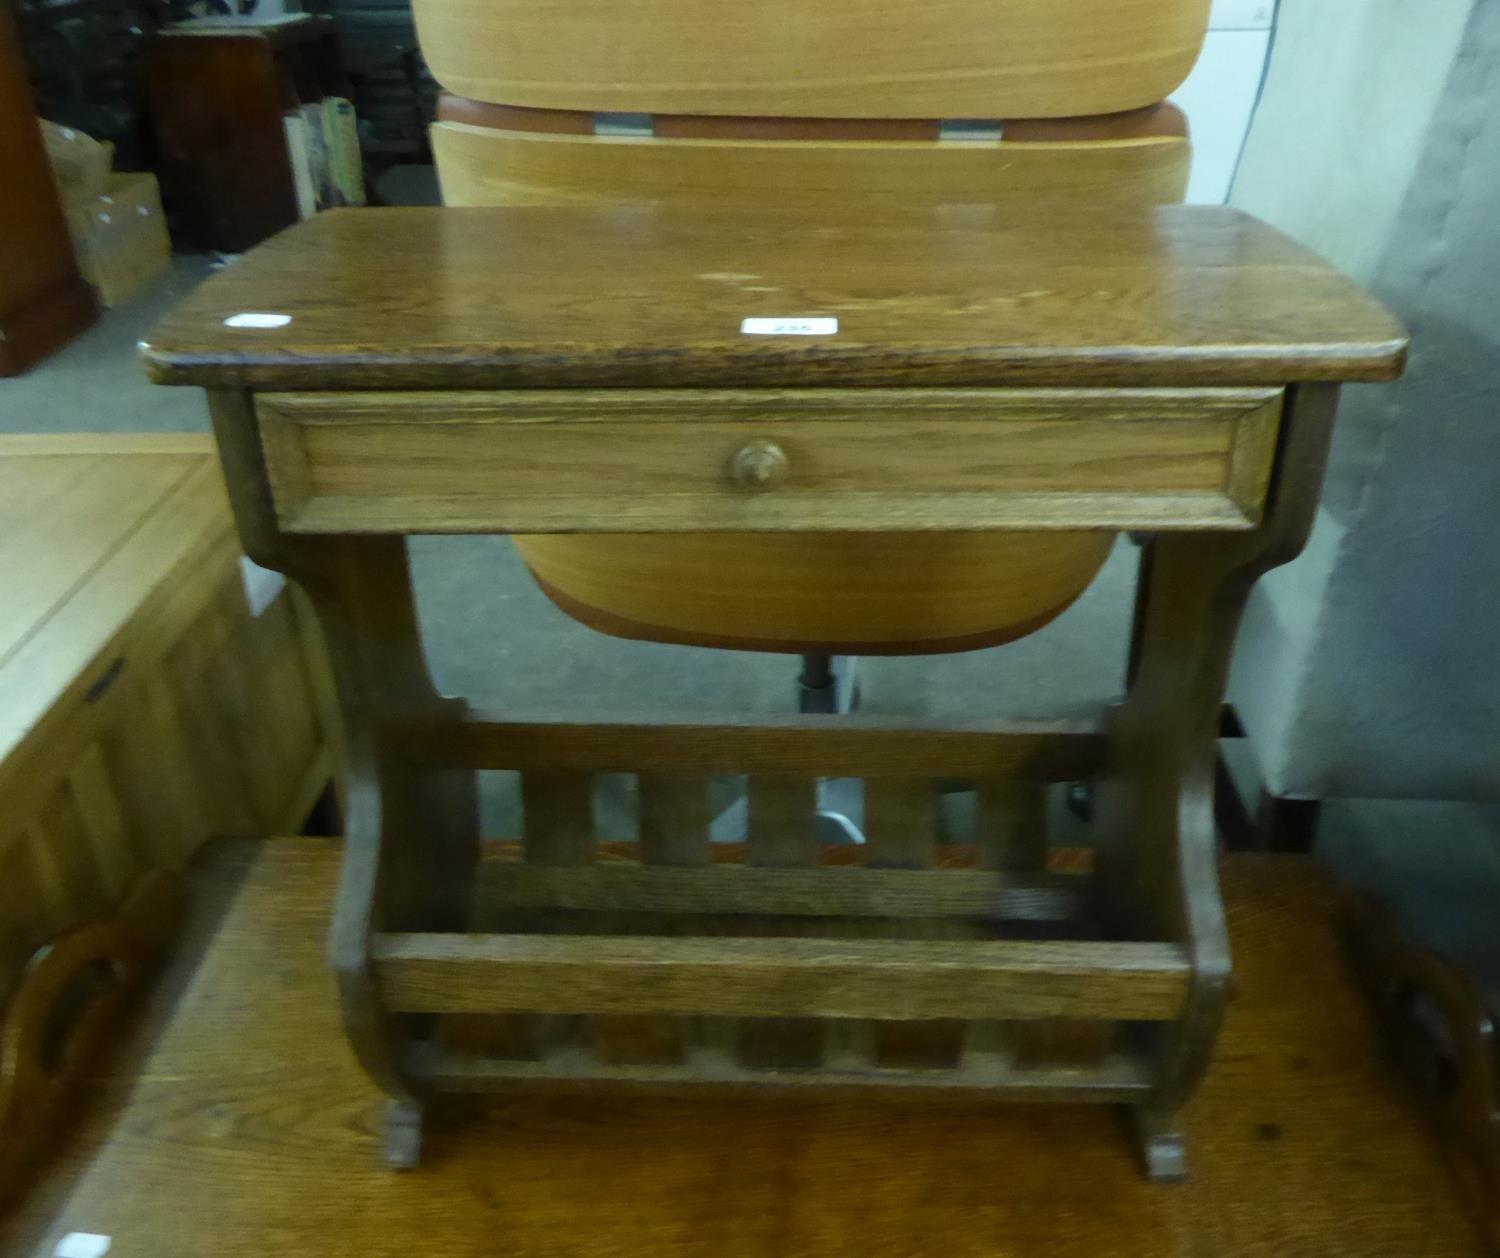 AN OAK OBLONG COFFEE TABLE, WITH DRAWER AND PERIODICAL RACK BELOW